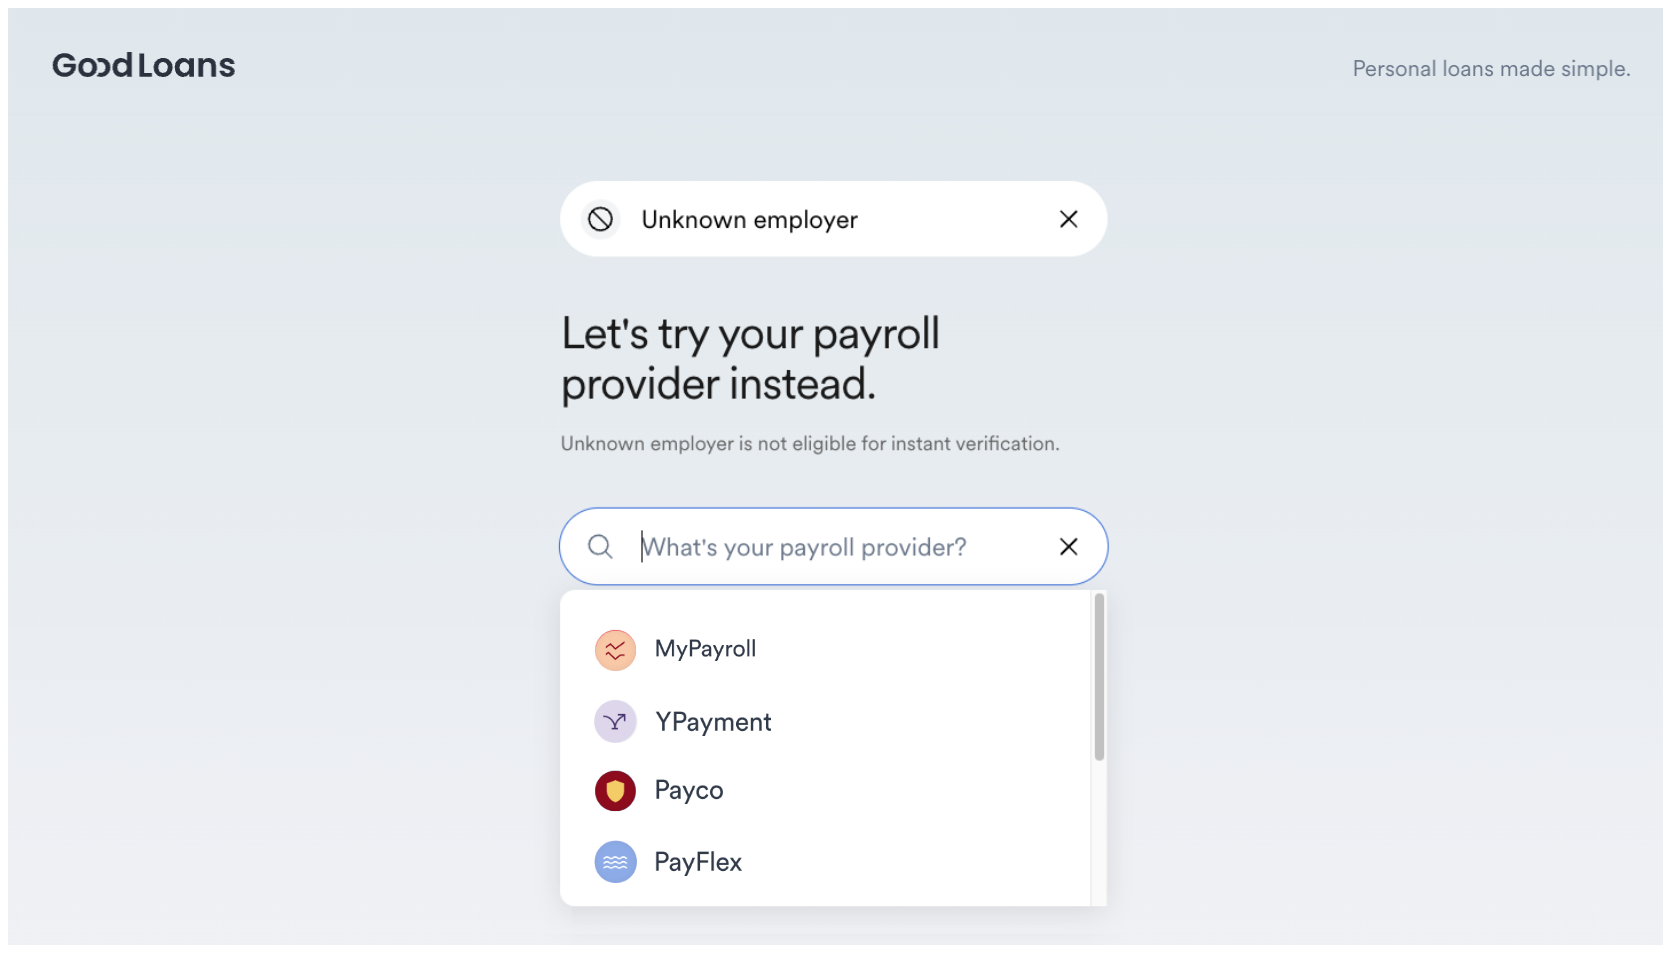 If the user cannot find their employer, they are suggested a list of payroll providers.